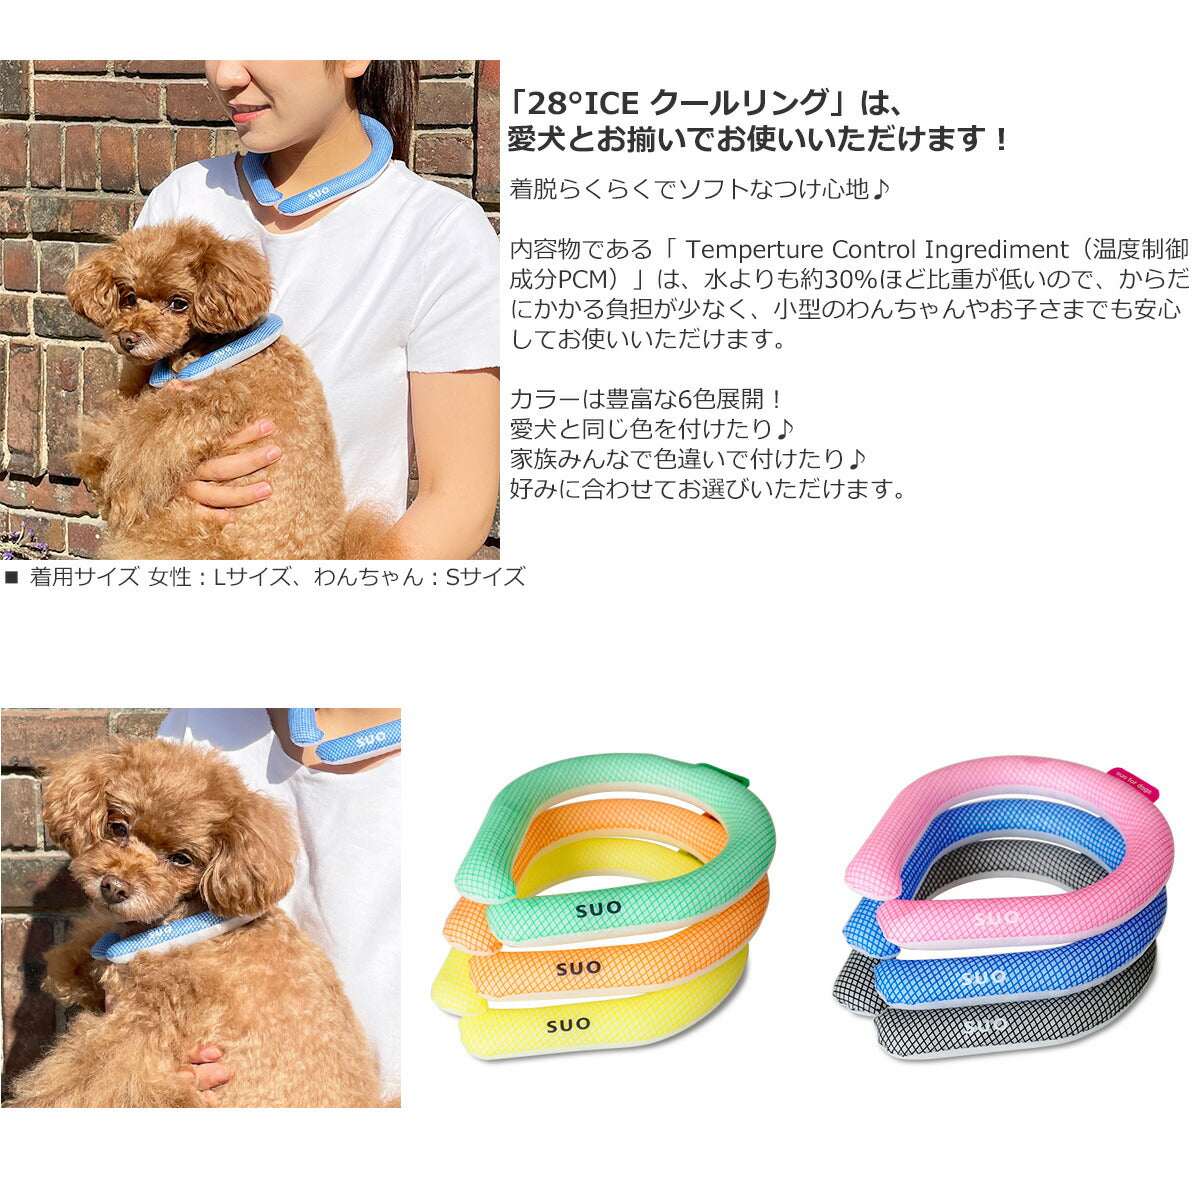 SUO for dogs 28°ICE SUOリング ボタンなし M ピンク 熱中症対策グッズ 暑さ対策 ひんやり 首 冷感 犬 大人 子供